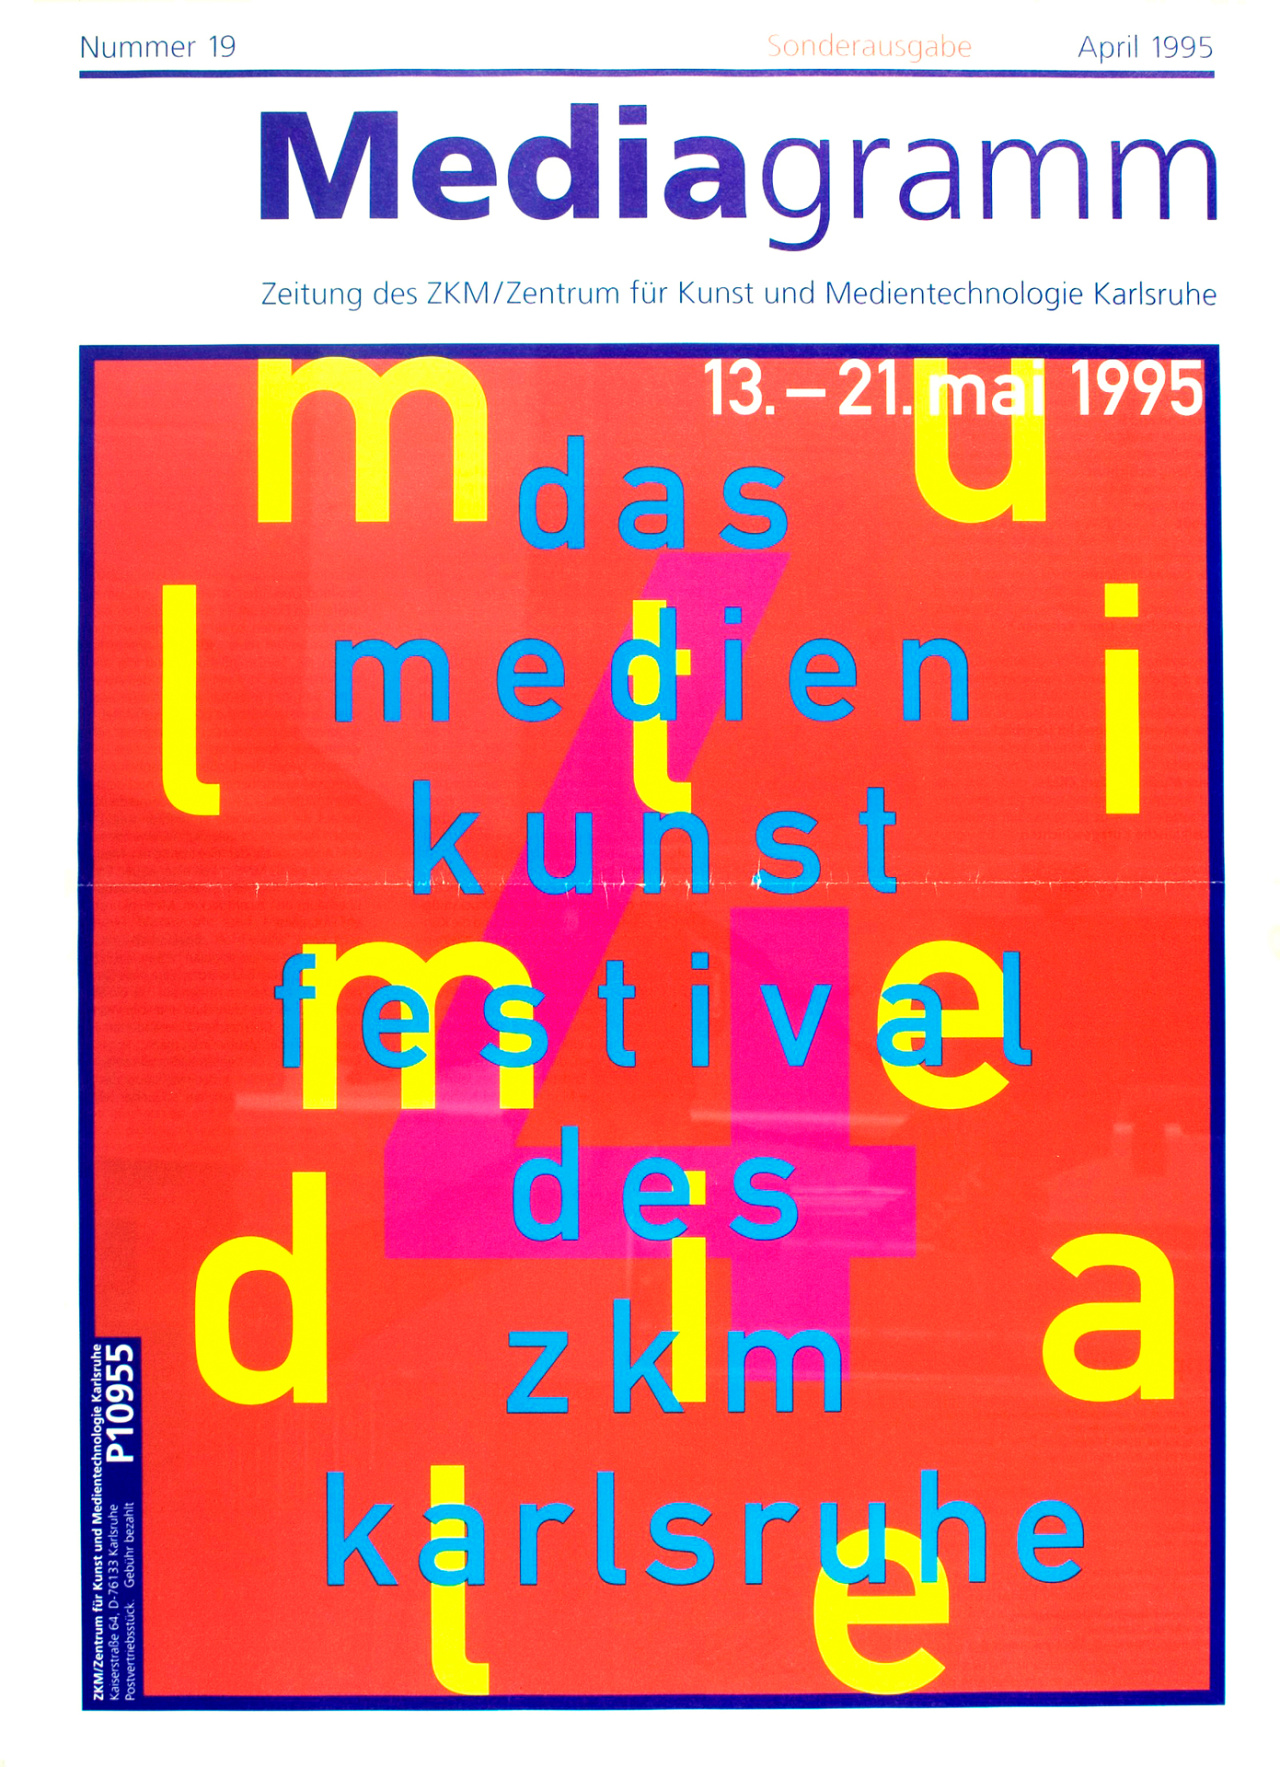 Cover of the publication »Mediagramm Nr. 19«